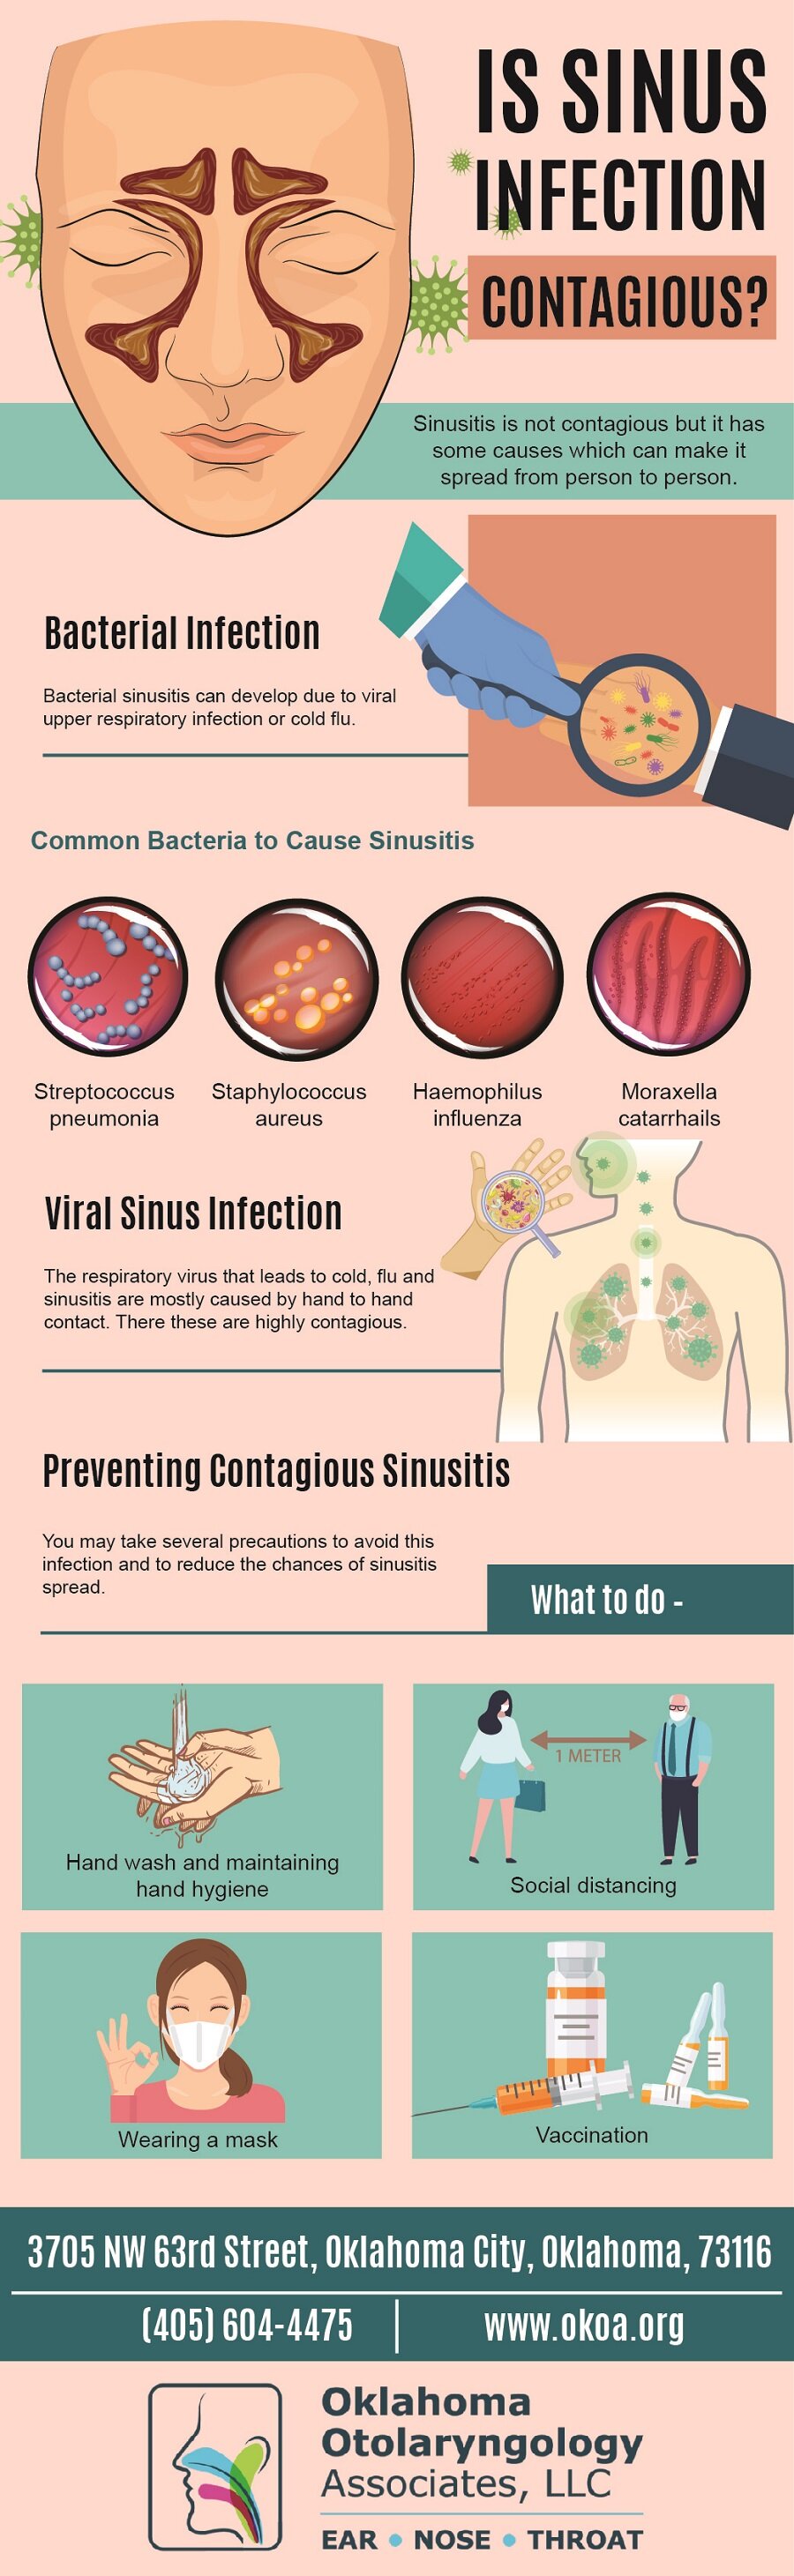 Is Sinus Infection Contagious Infographic